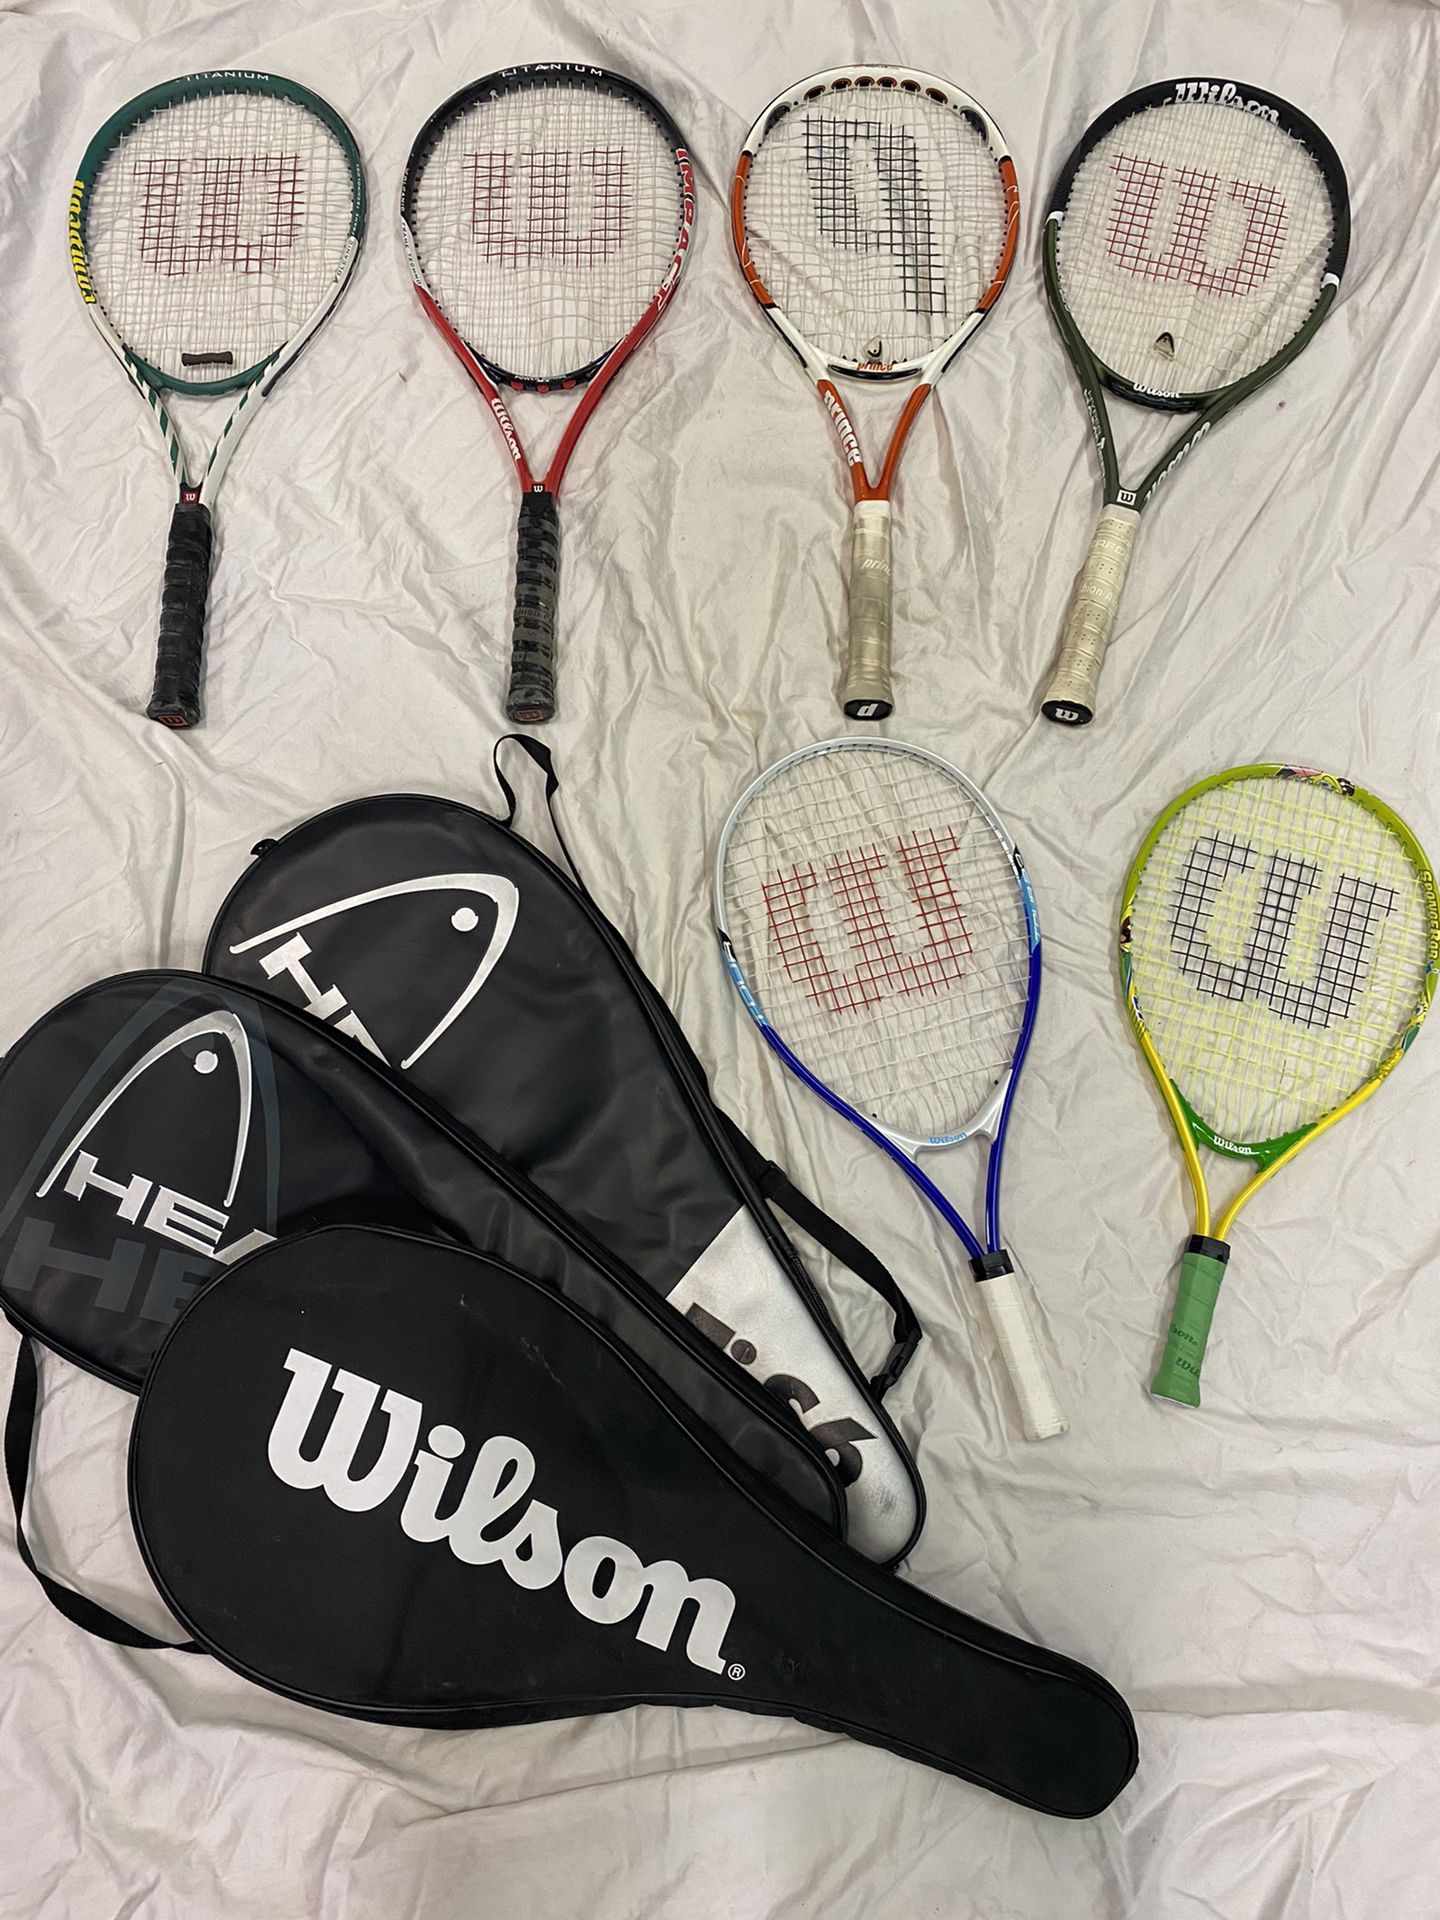 4 Tennis Racquets 2 Racket ball and basket with new tennis balls